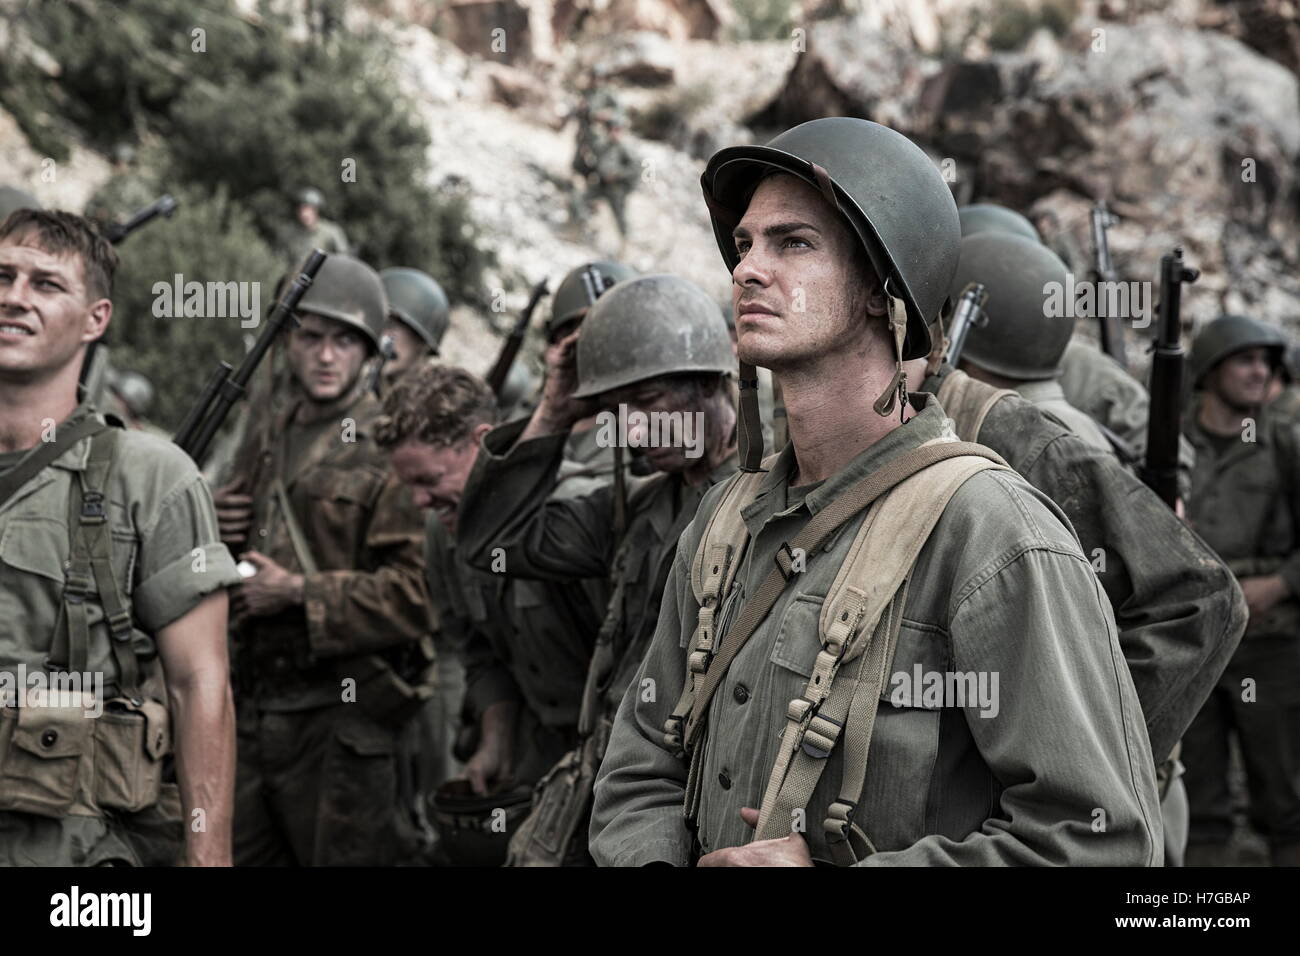 RELEASE DATE: November 4, 2016 TITLE: Hacksaw Ridge STUDIO: Lionsgate DIRECTOR: Mel Gibson PLOT: WWII American Army Medic Desmond T. Doss, who served during the Battle of Okinawa, refuses to kill people and becomes the first Conscientious Objector in American history to be awarded the Medal of Honor STARRING: Andrew Garfield as Desmond T. Doss (Credit Image: c Lionsgate/Entertainment Pictures/) Stock Photo